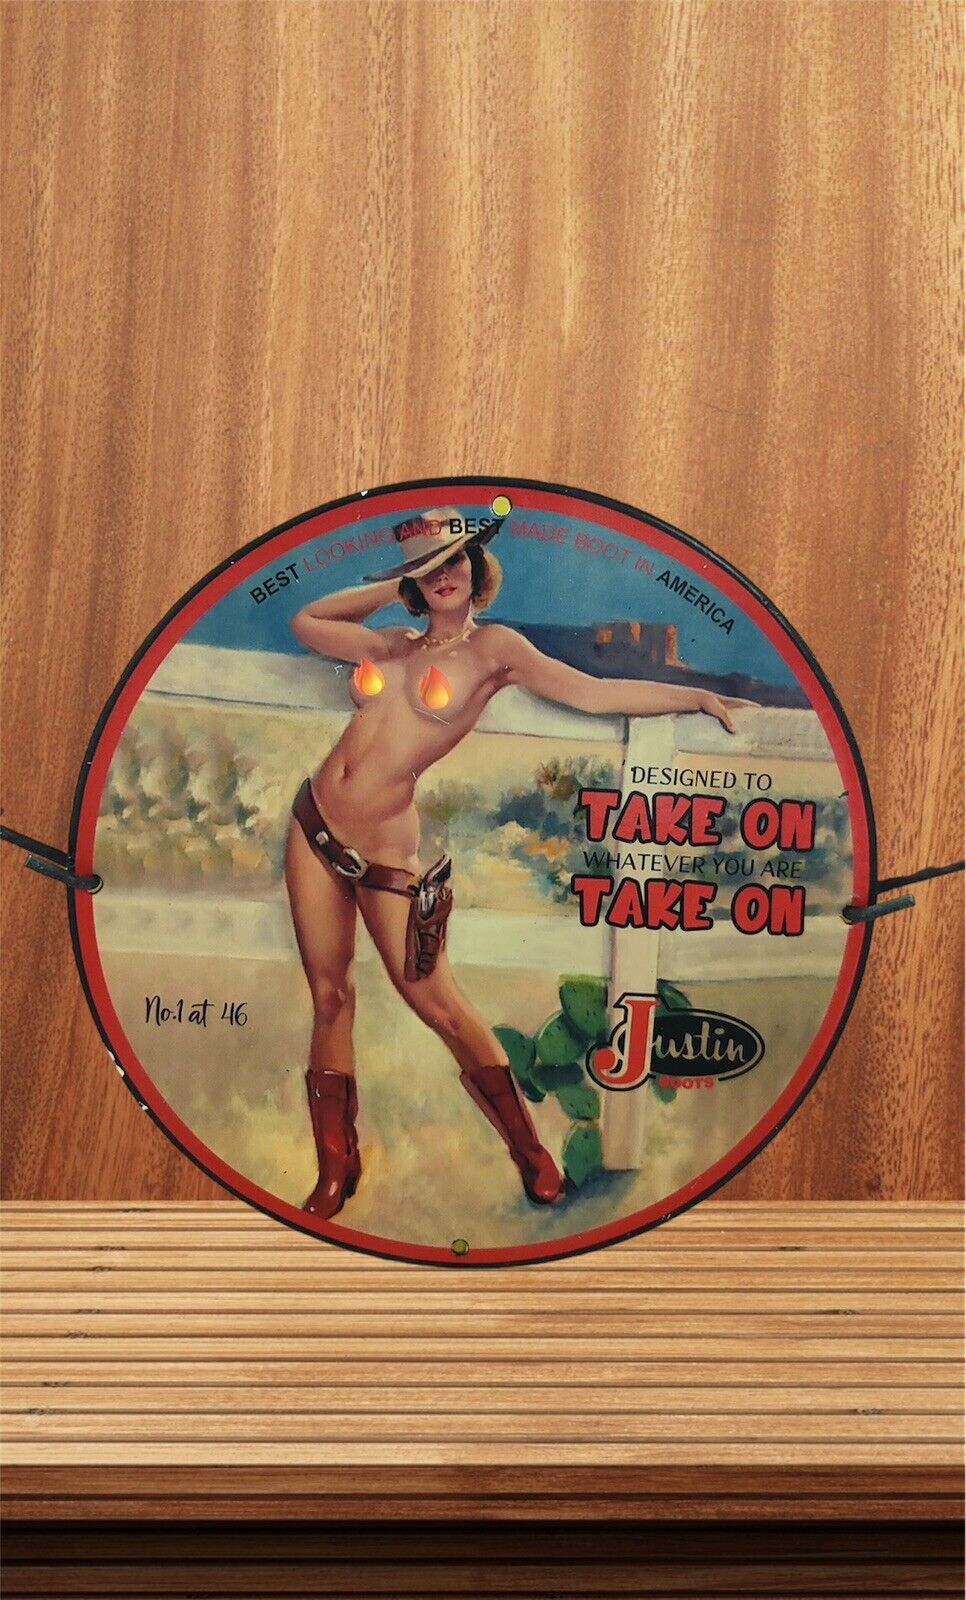 RARE JUSTIN BOOTS PINUP NAKED COW GIRL PORCELAIN GAS STATION SERVICE OIL AD SIGN